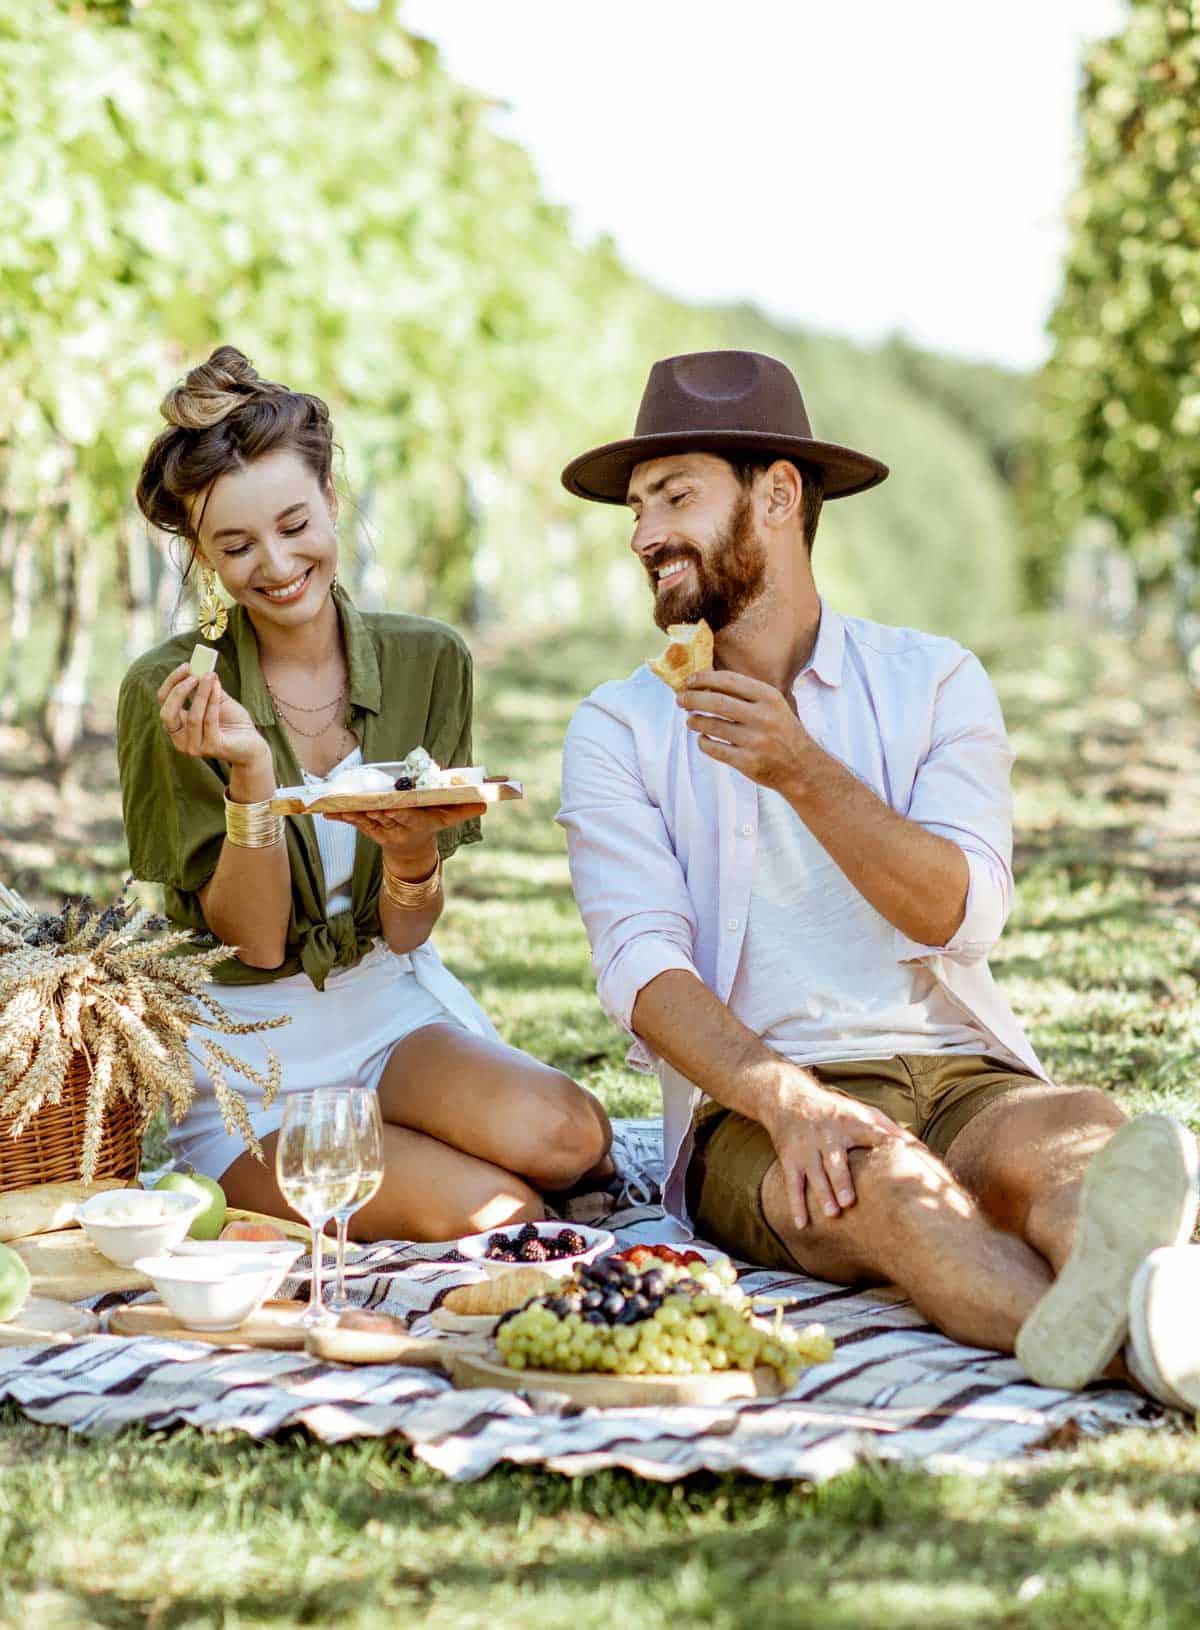 Young couple having a picnic in a vineyard.